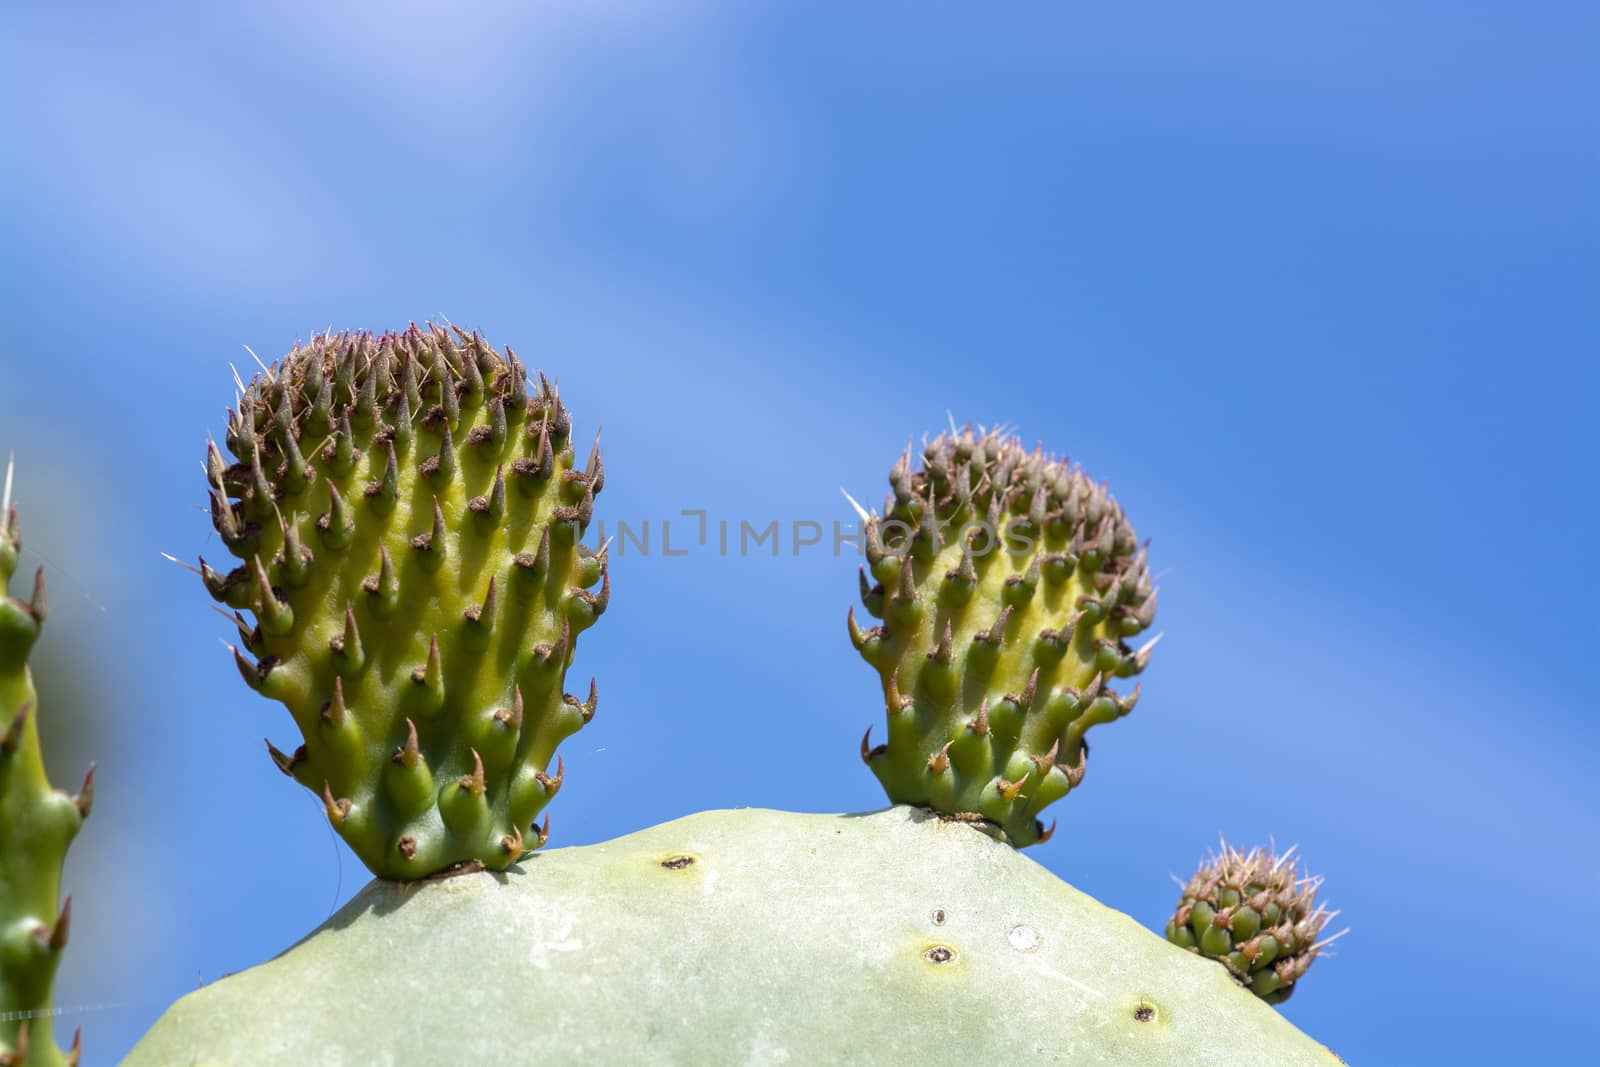 Thorny cactus with spikes and little fruits by ArtesiaWells